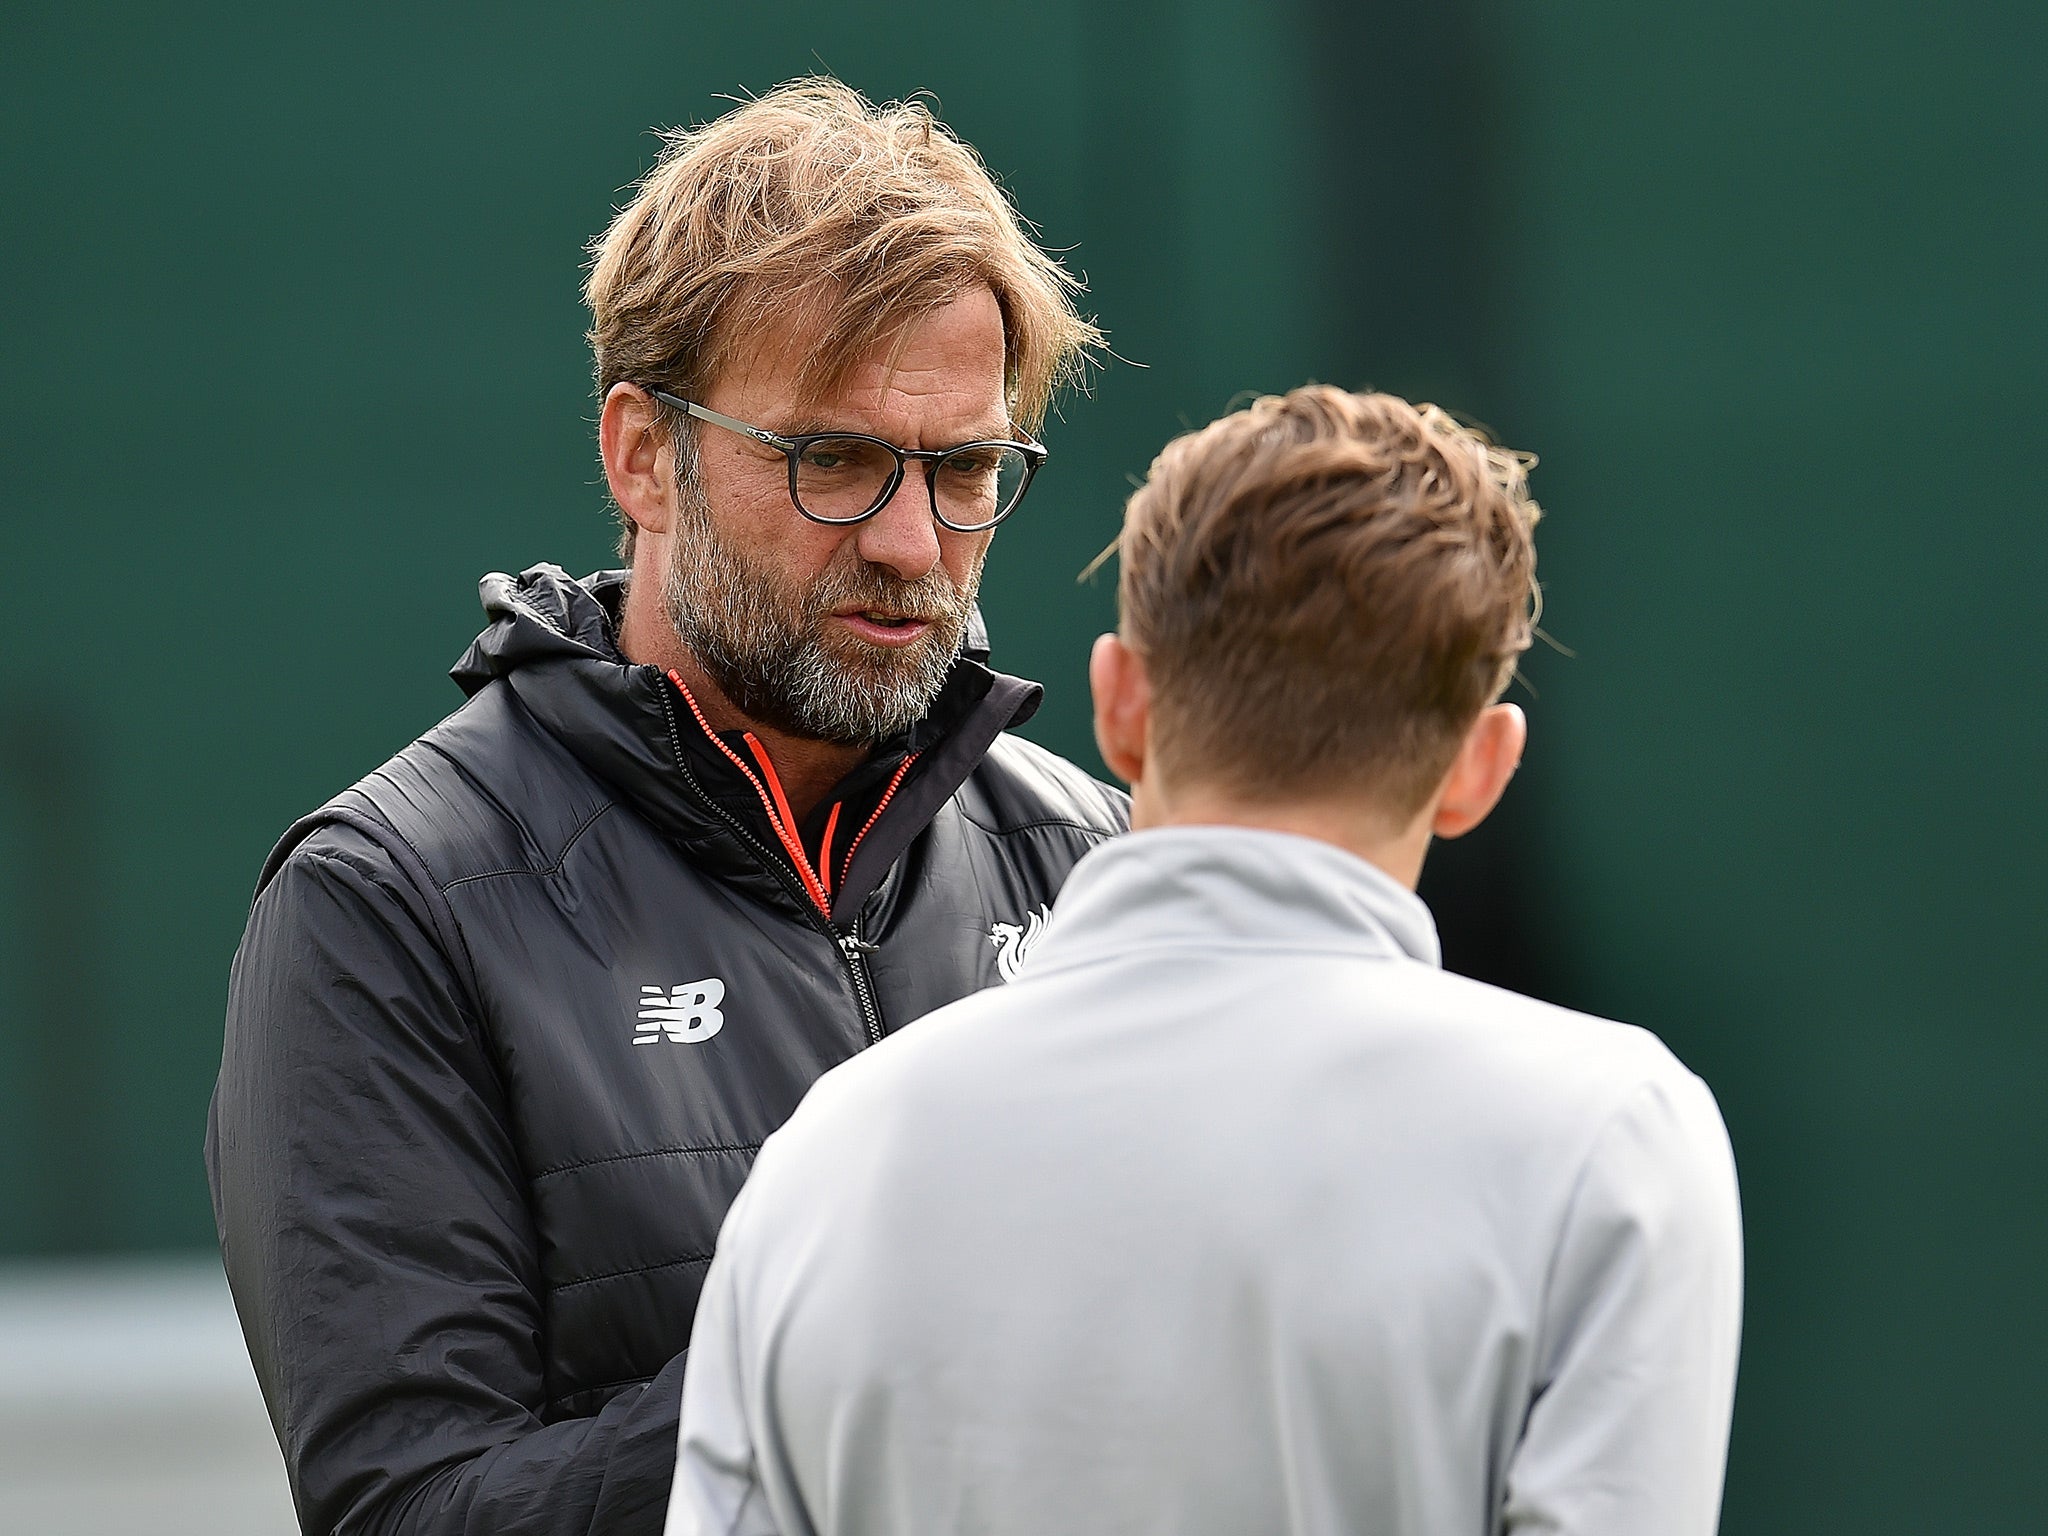 Jurgen Klopp's initial talks with transfer targets have proved 'positive'